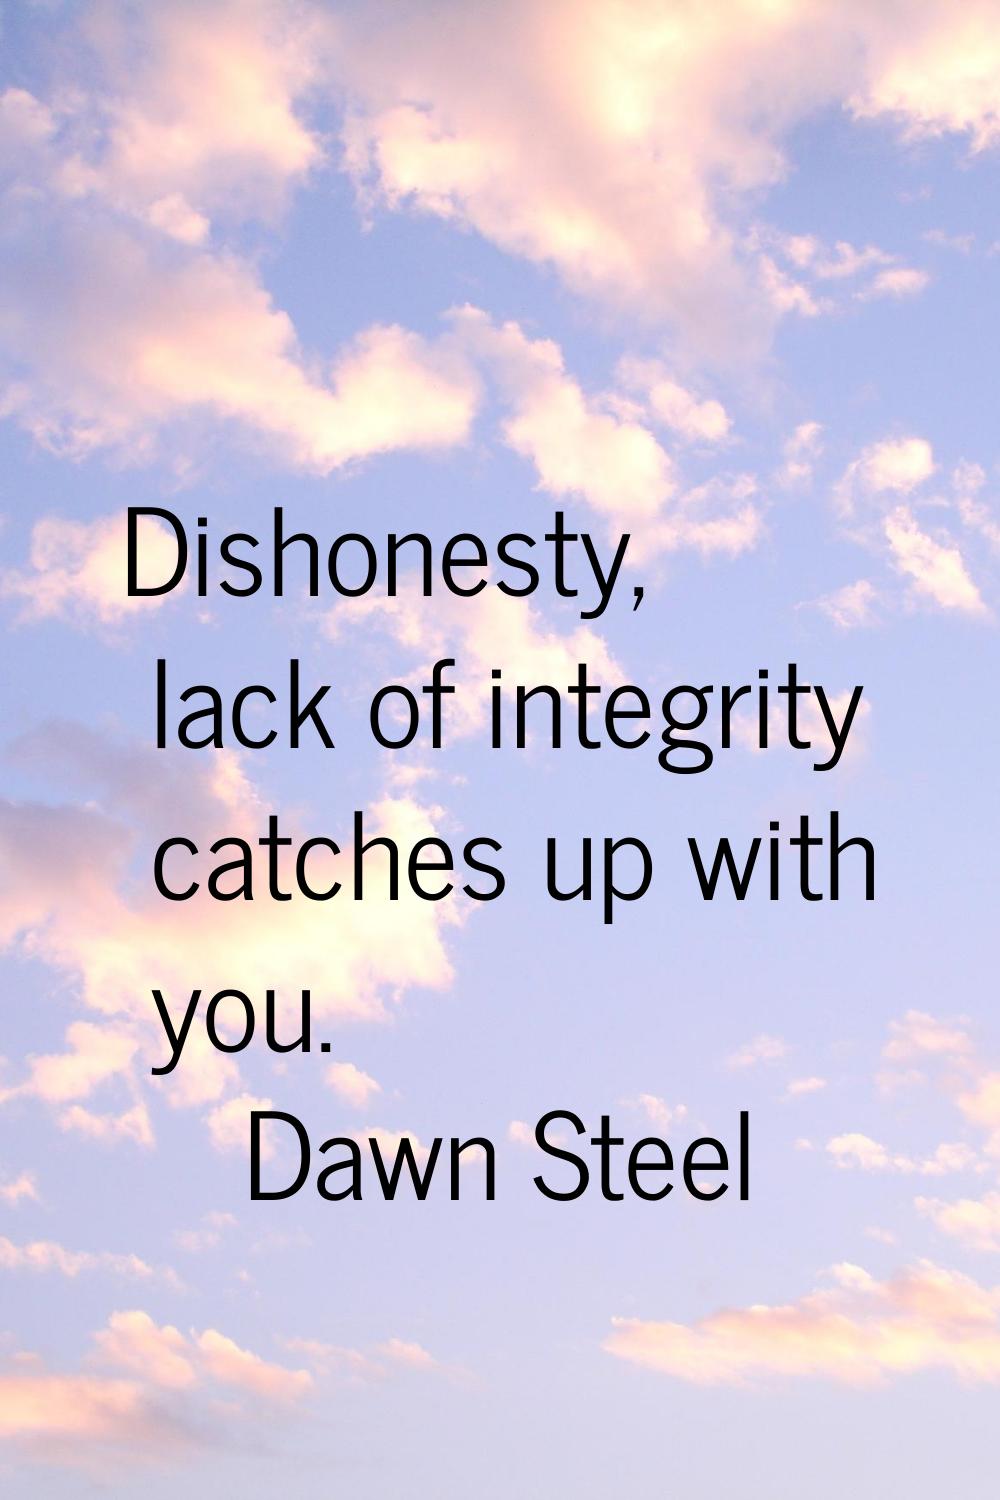 Dishonesty, lack of integrity catches up with you.